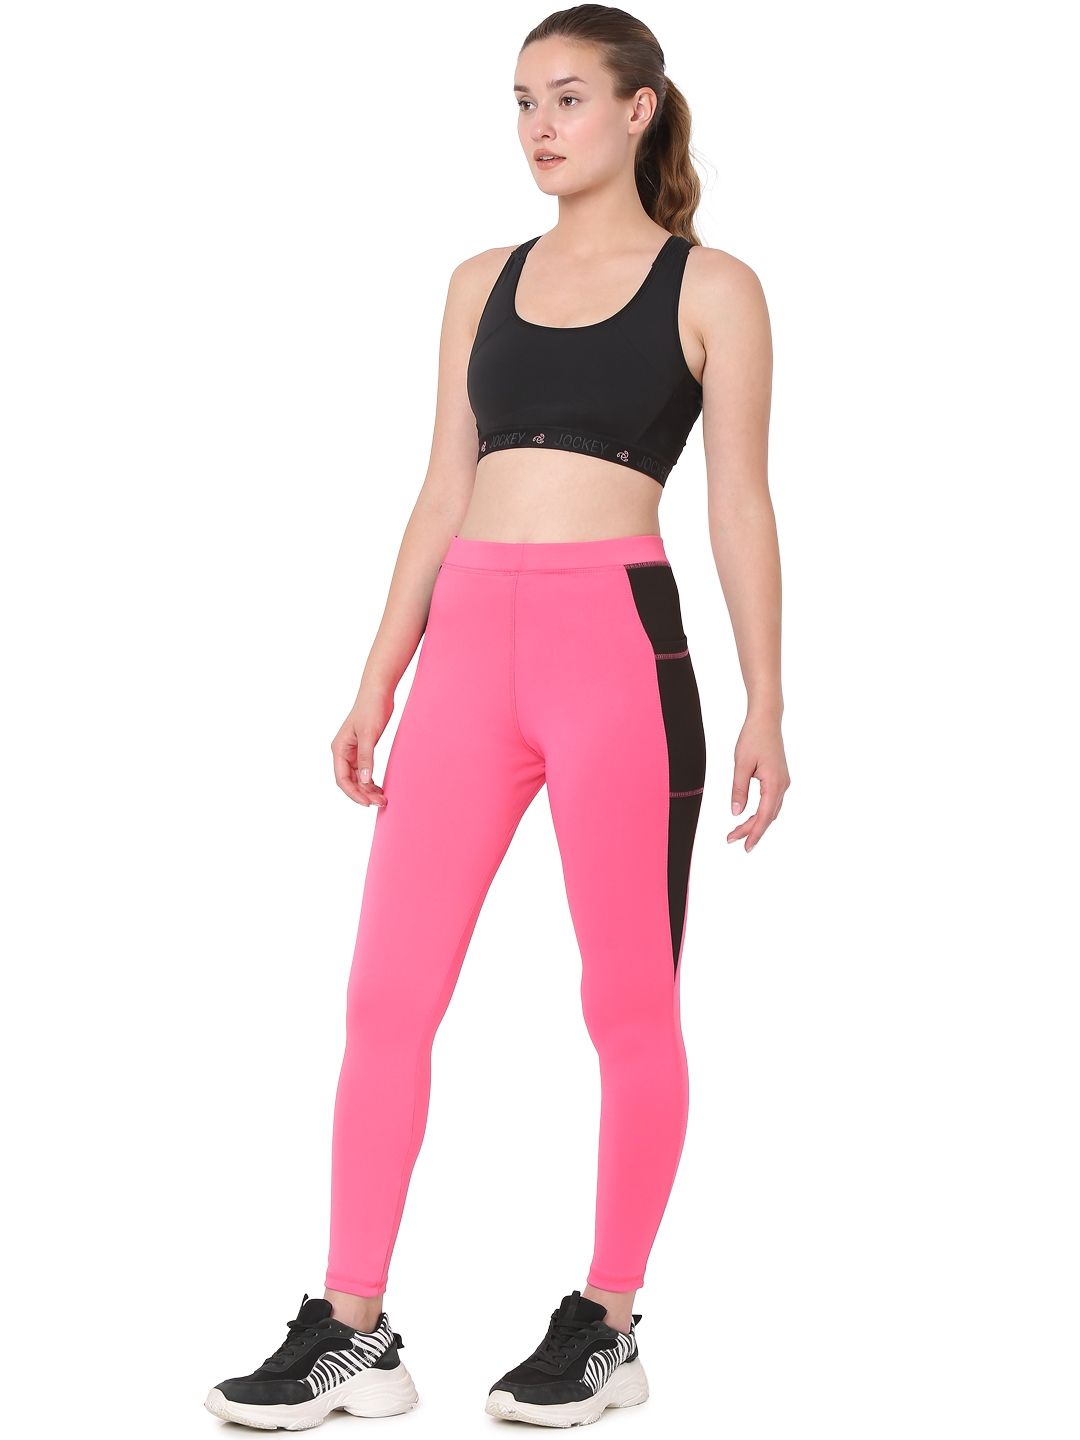 https://cdn.fynd.com/v2/falling-surf-7c8bb8/fyprod/wrkr/products/pictures/item/free/original/a2L501sVp-Smarty-Pants-womens-stretchable-mid-high-rise-waist-pink-color-yoga-tights..jpeg